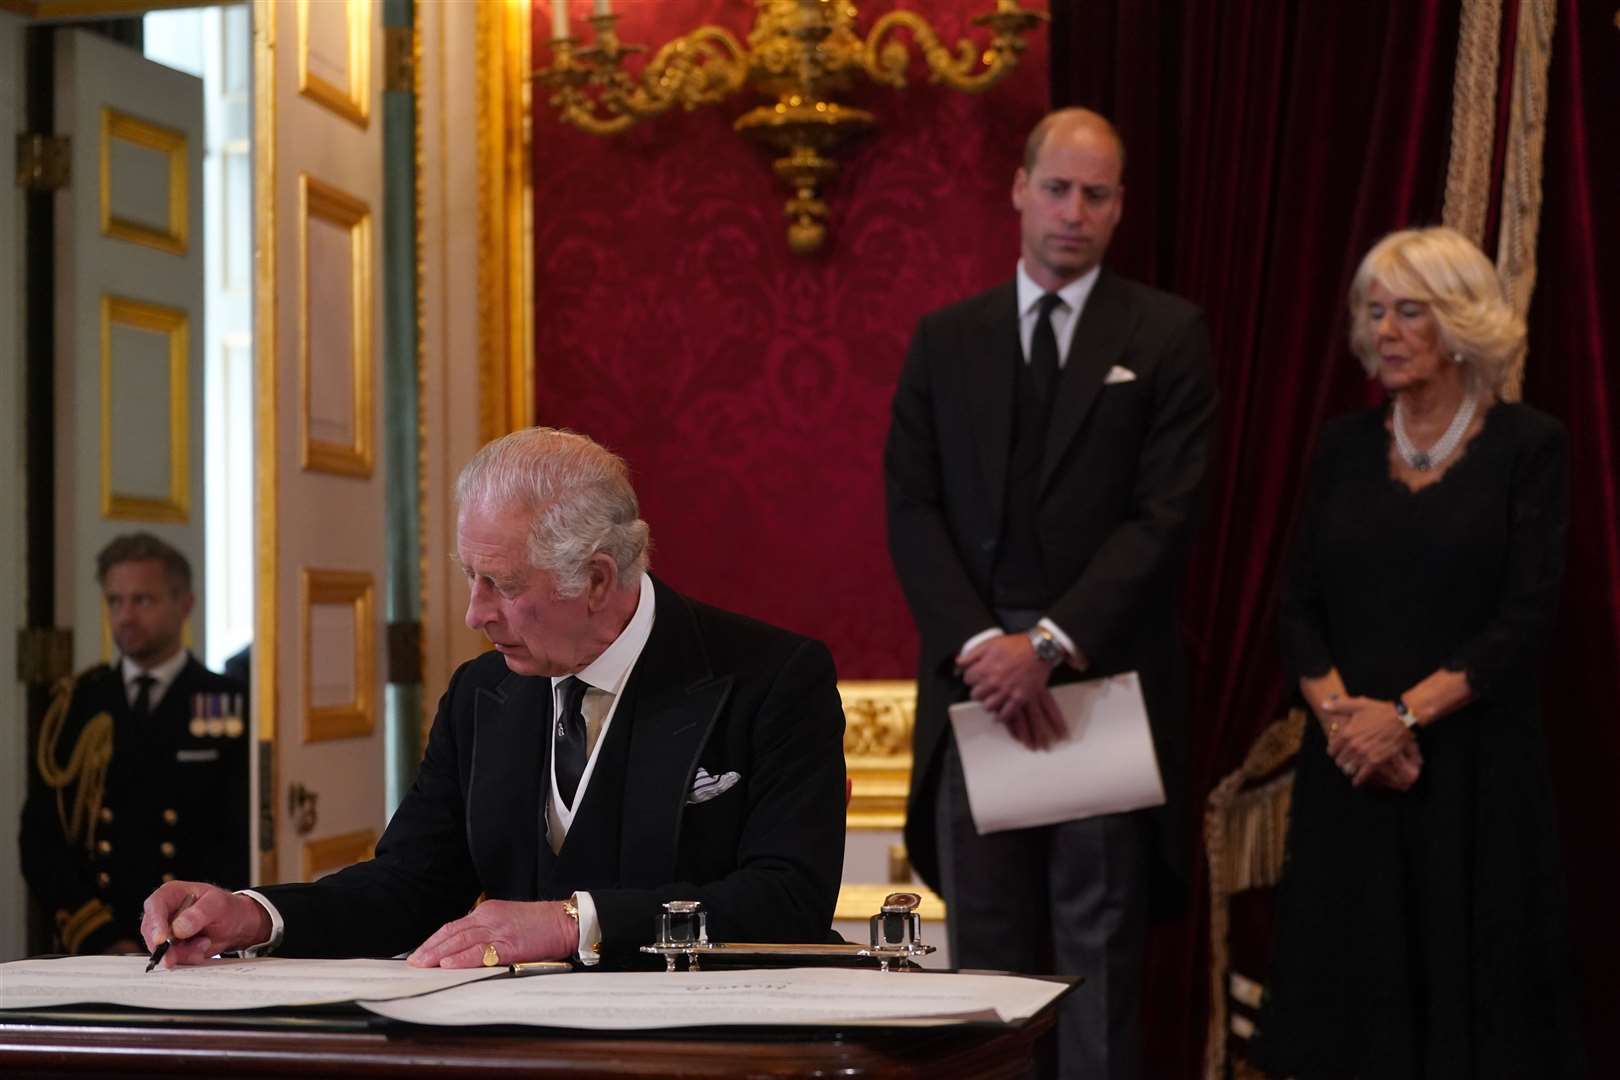 King Charles III signs an oath to uphold the security of the Church in Scotland during the Accession Council at St James’s Palace, London (Victoria Jones/PA)